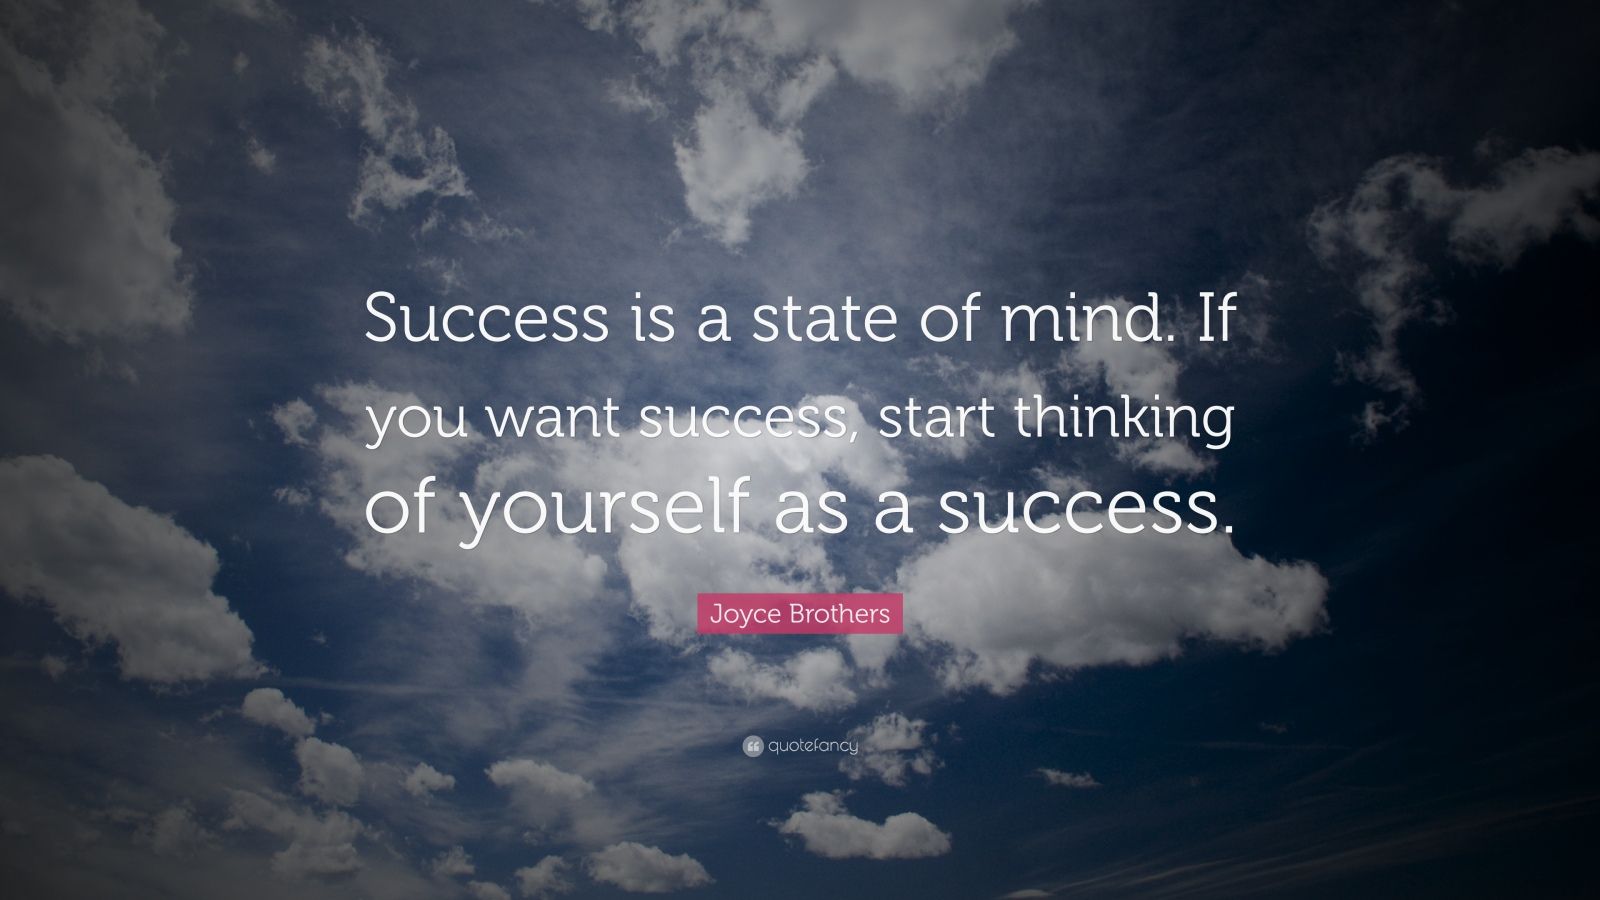 Joyce Brothers Quote: “Success is a state of mind. If you want success ...